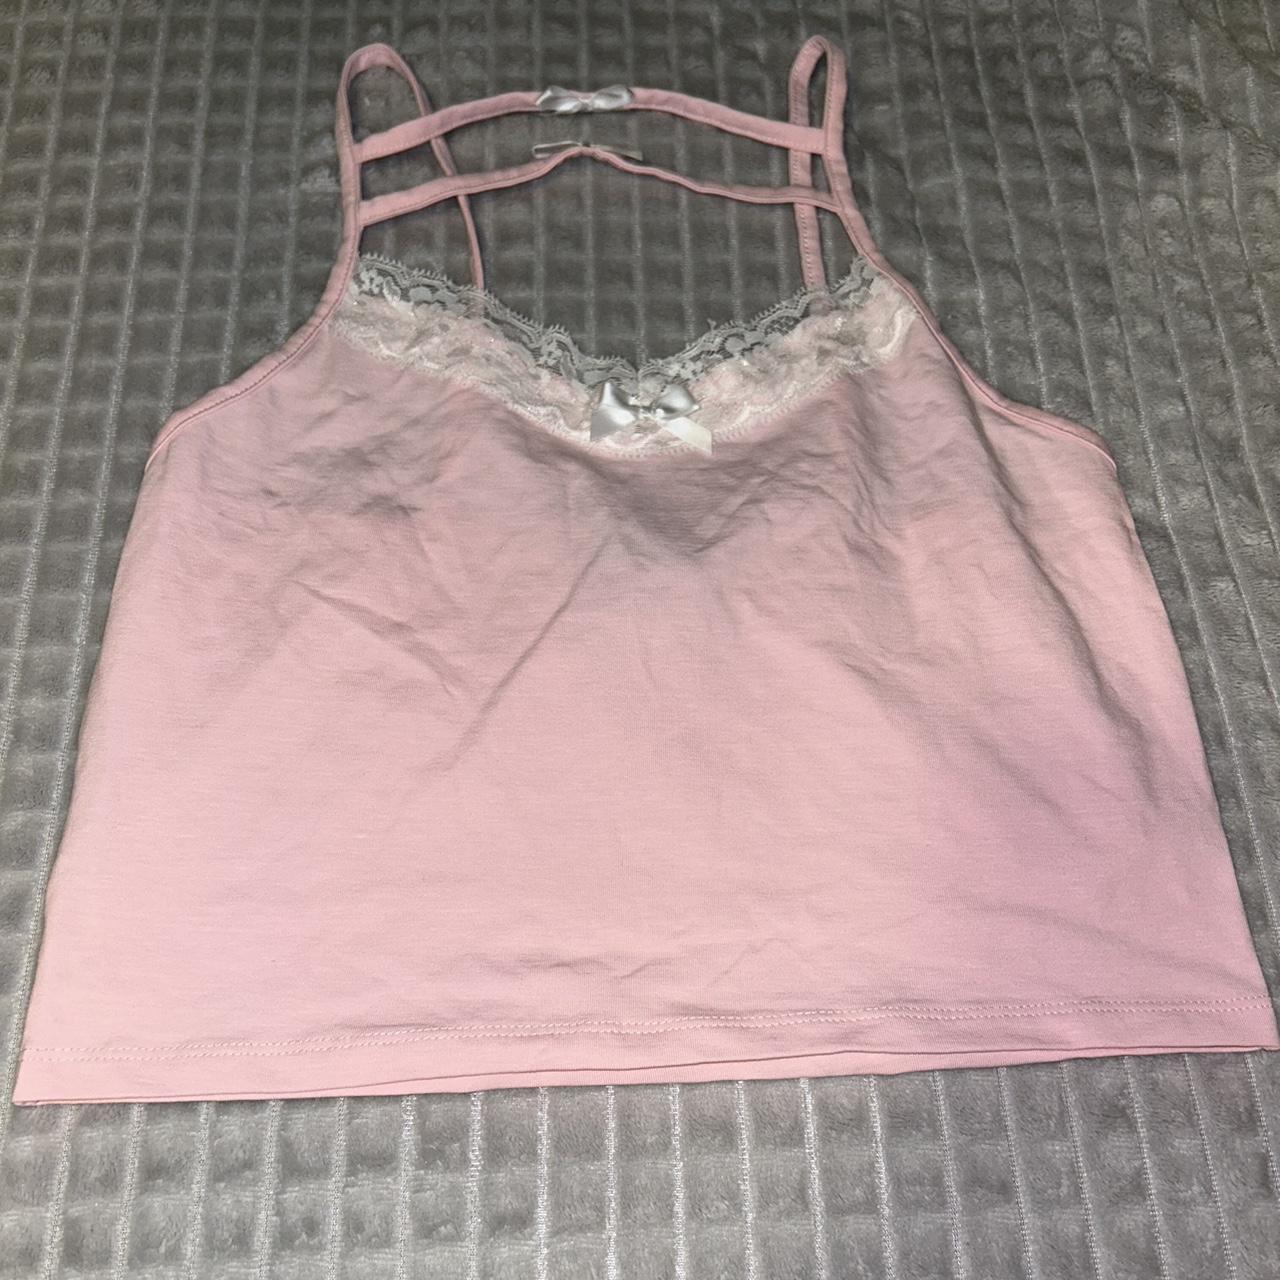 Really cute top Never wore - Depop